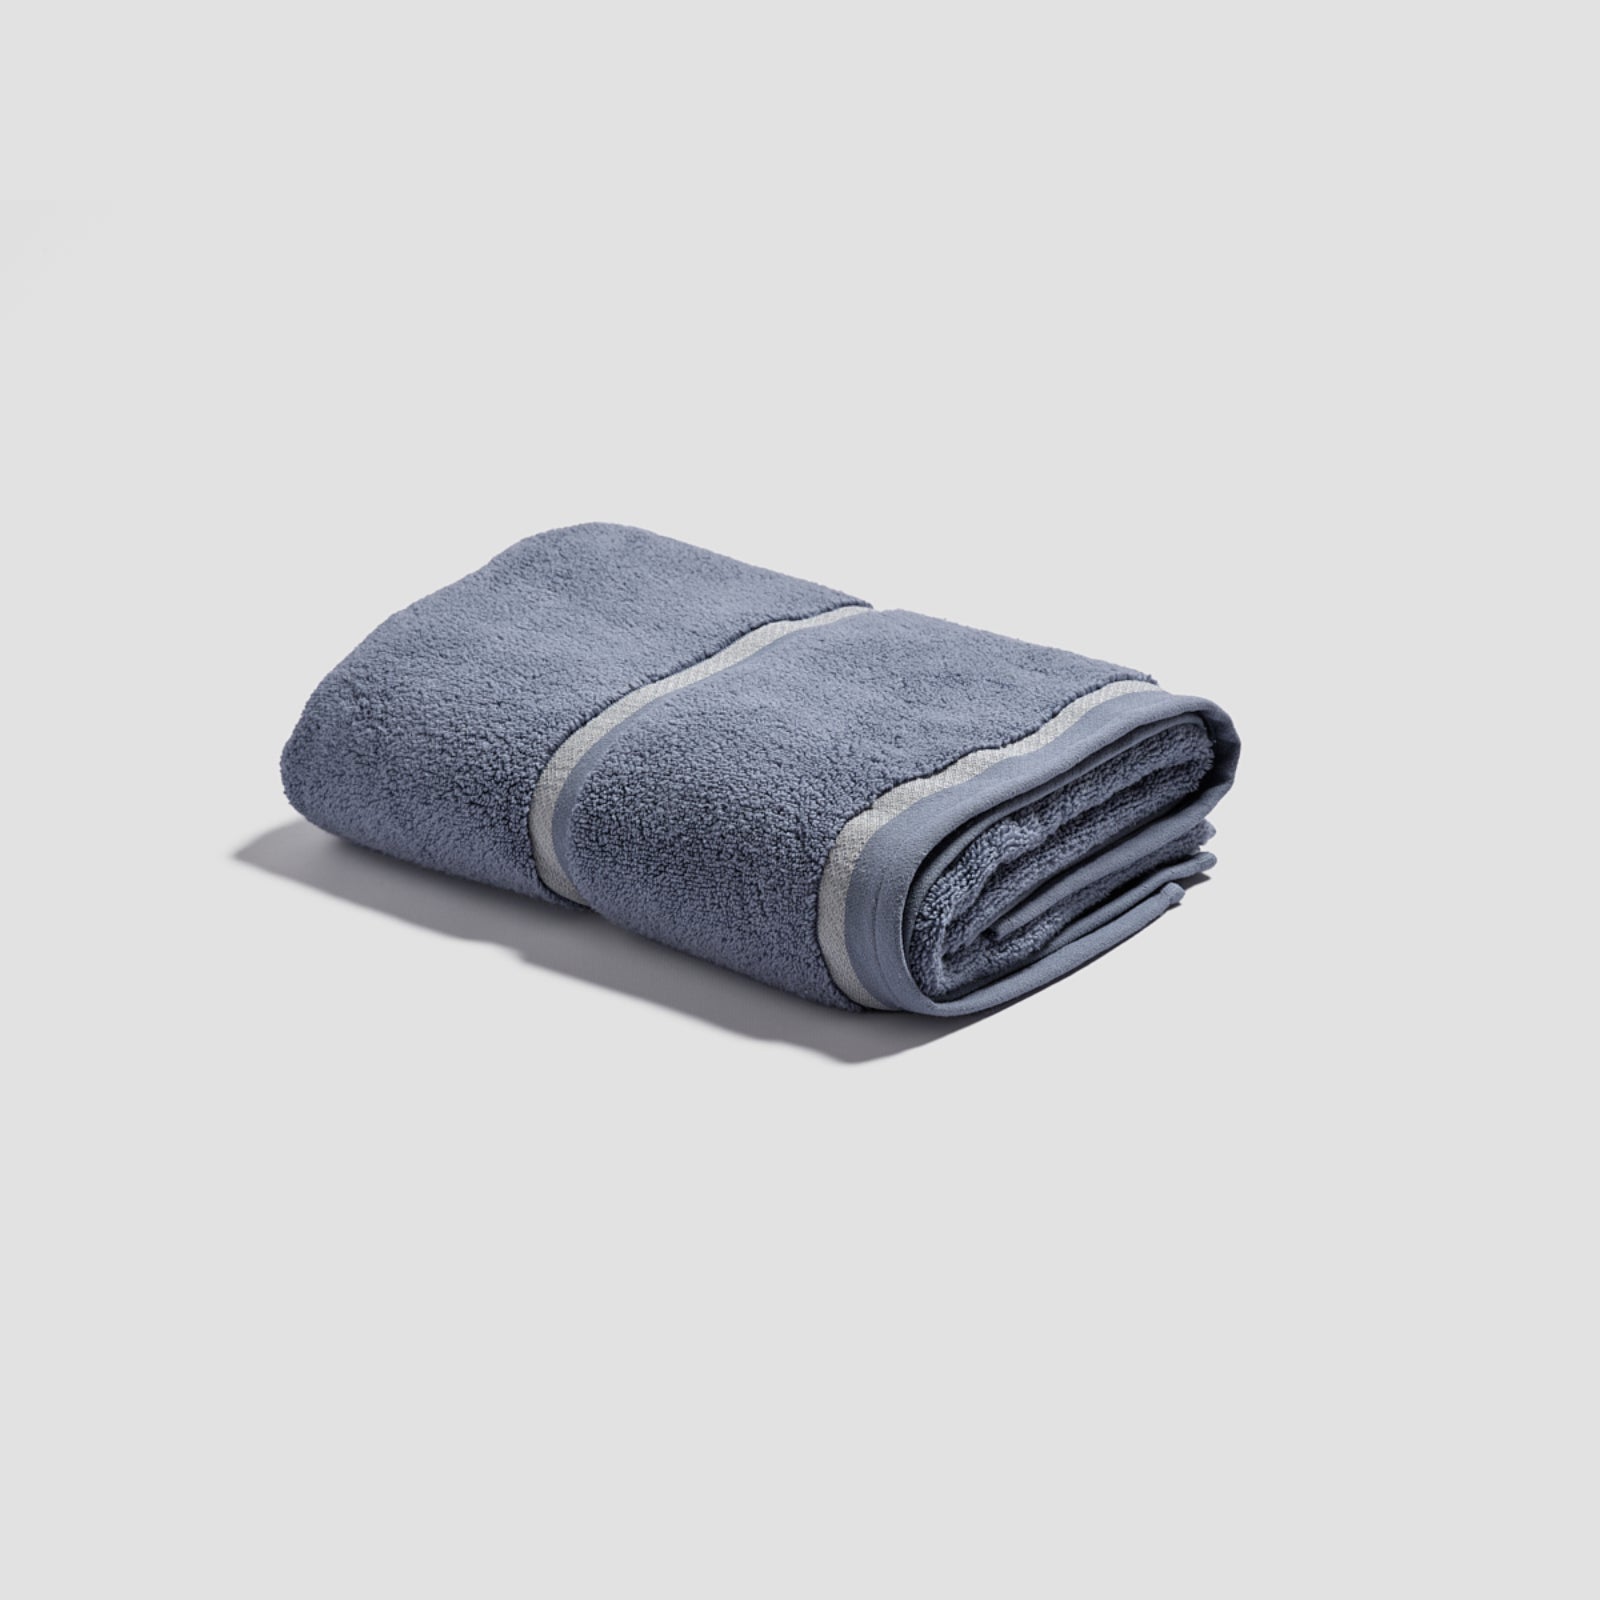 Warm Blue Cotton Towels | Piglet in Bed US